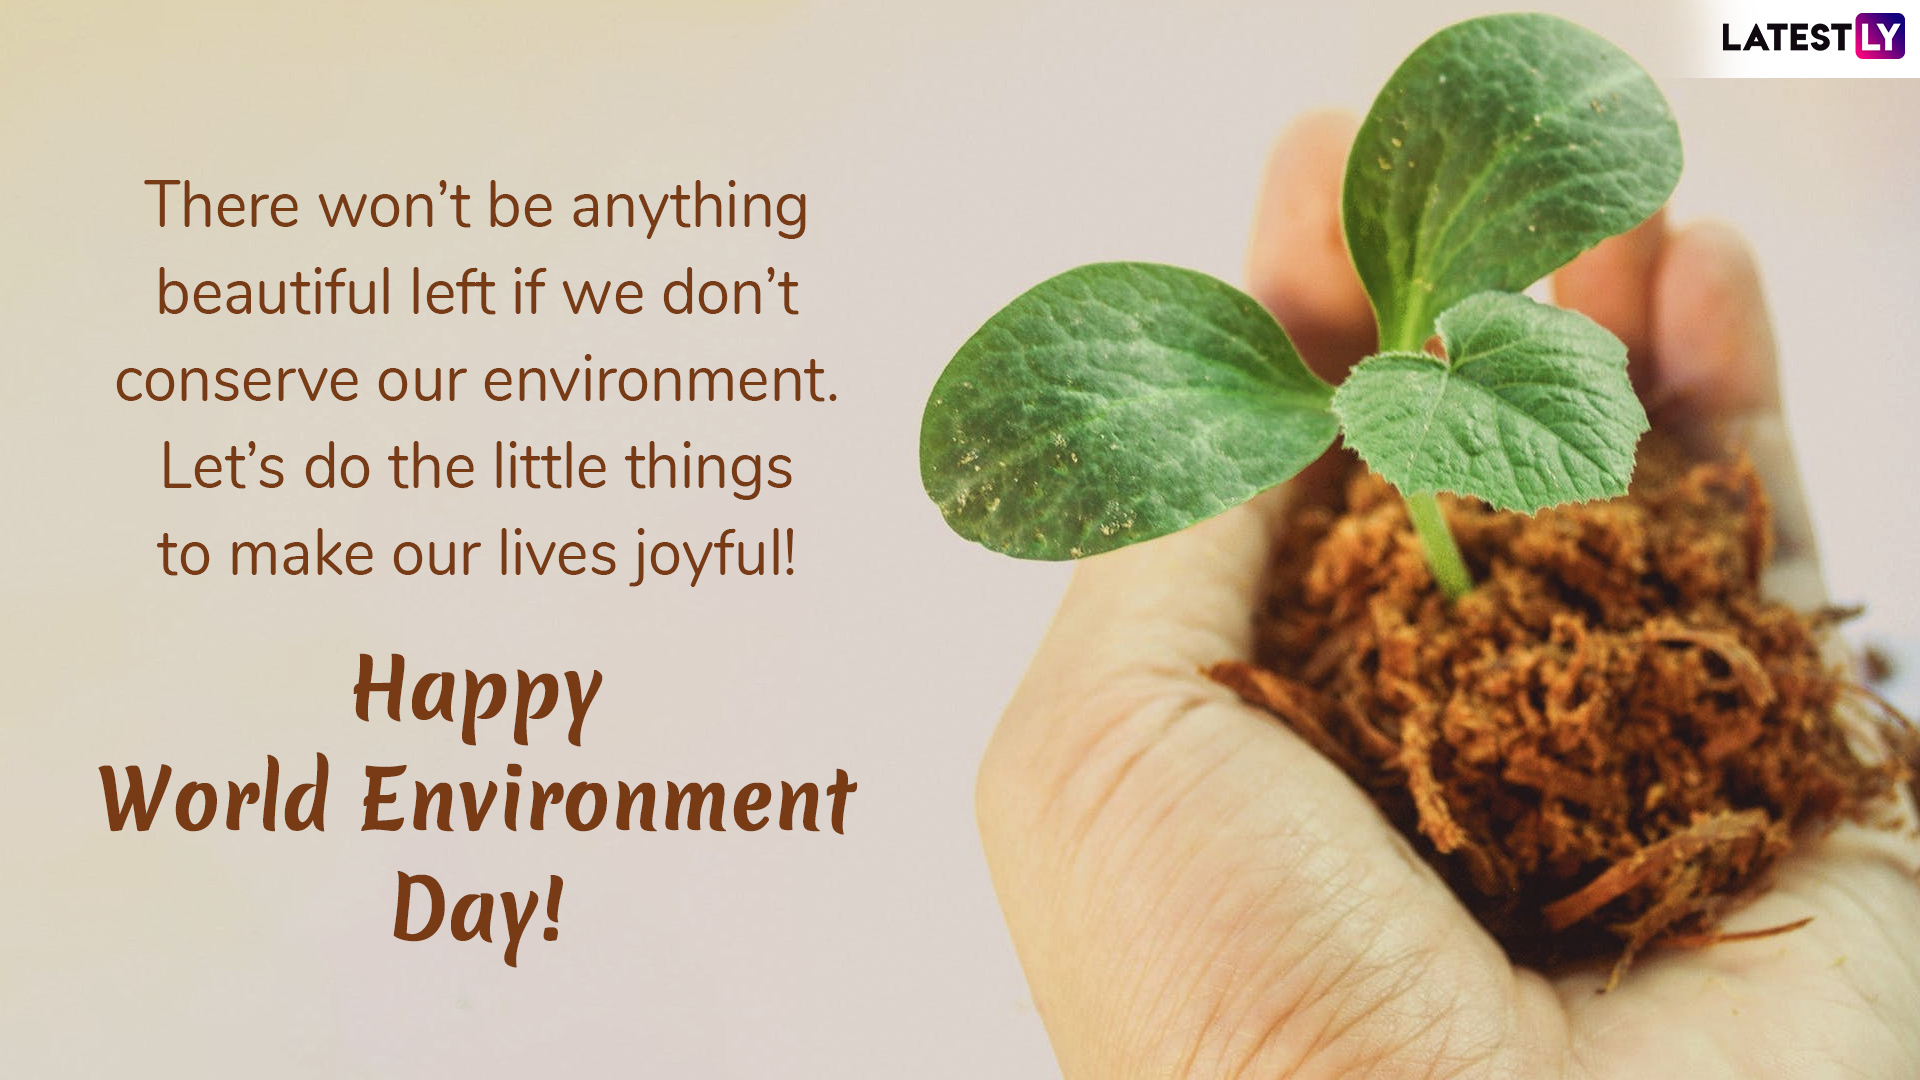 World Environment Day messages